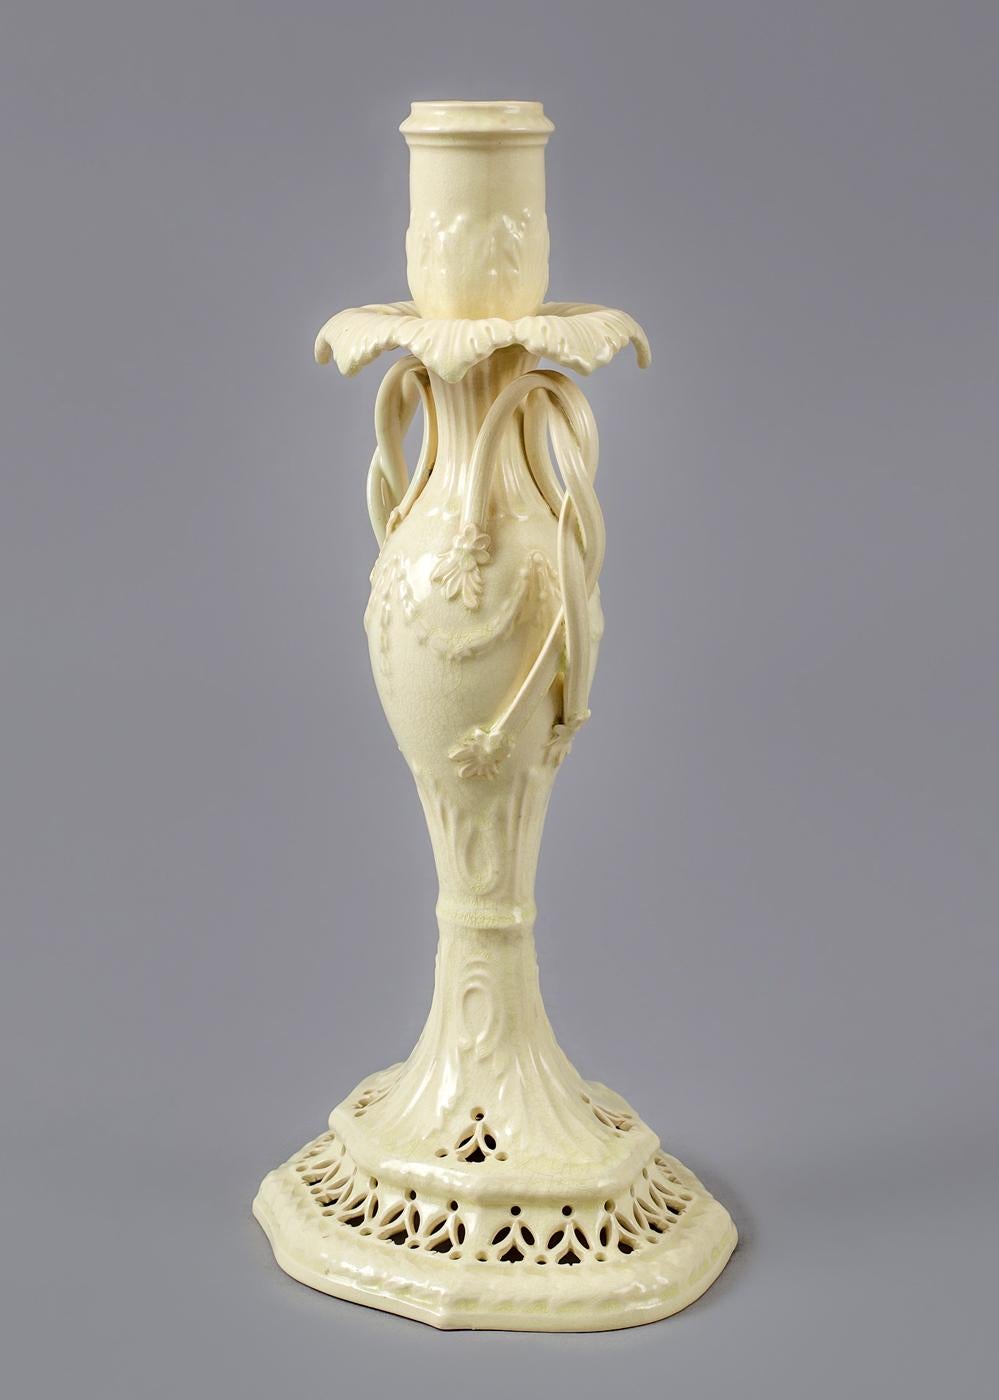 18th Century Creamware Candlestick with Twisted Handles In Good Condition For Sale In Sheffield, MA